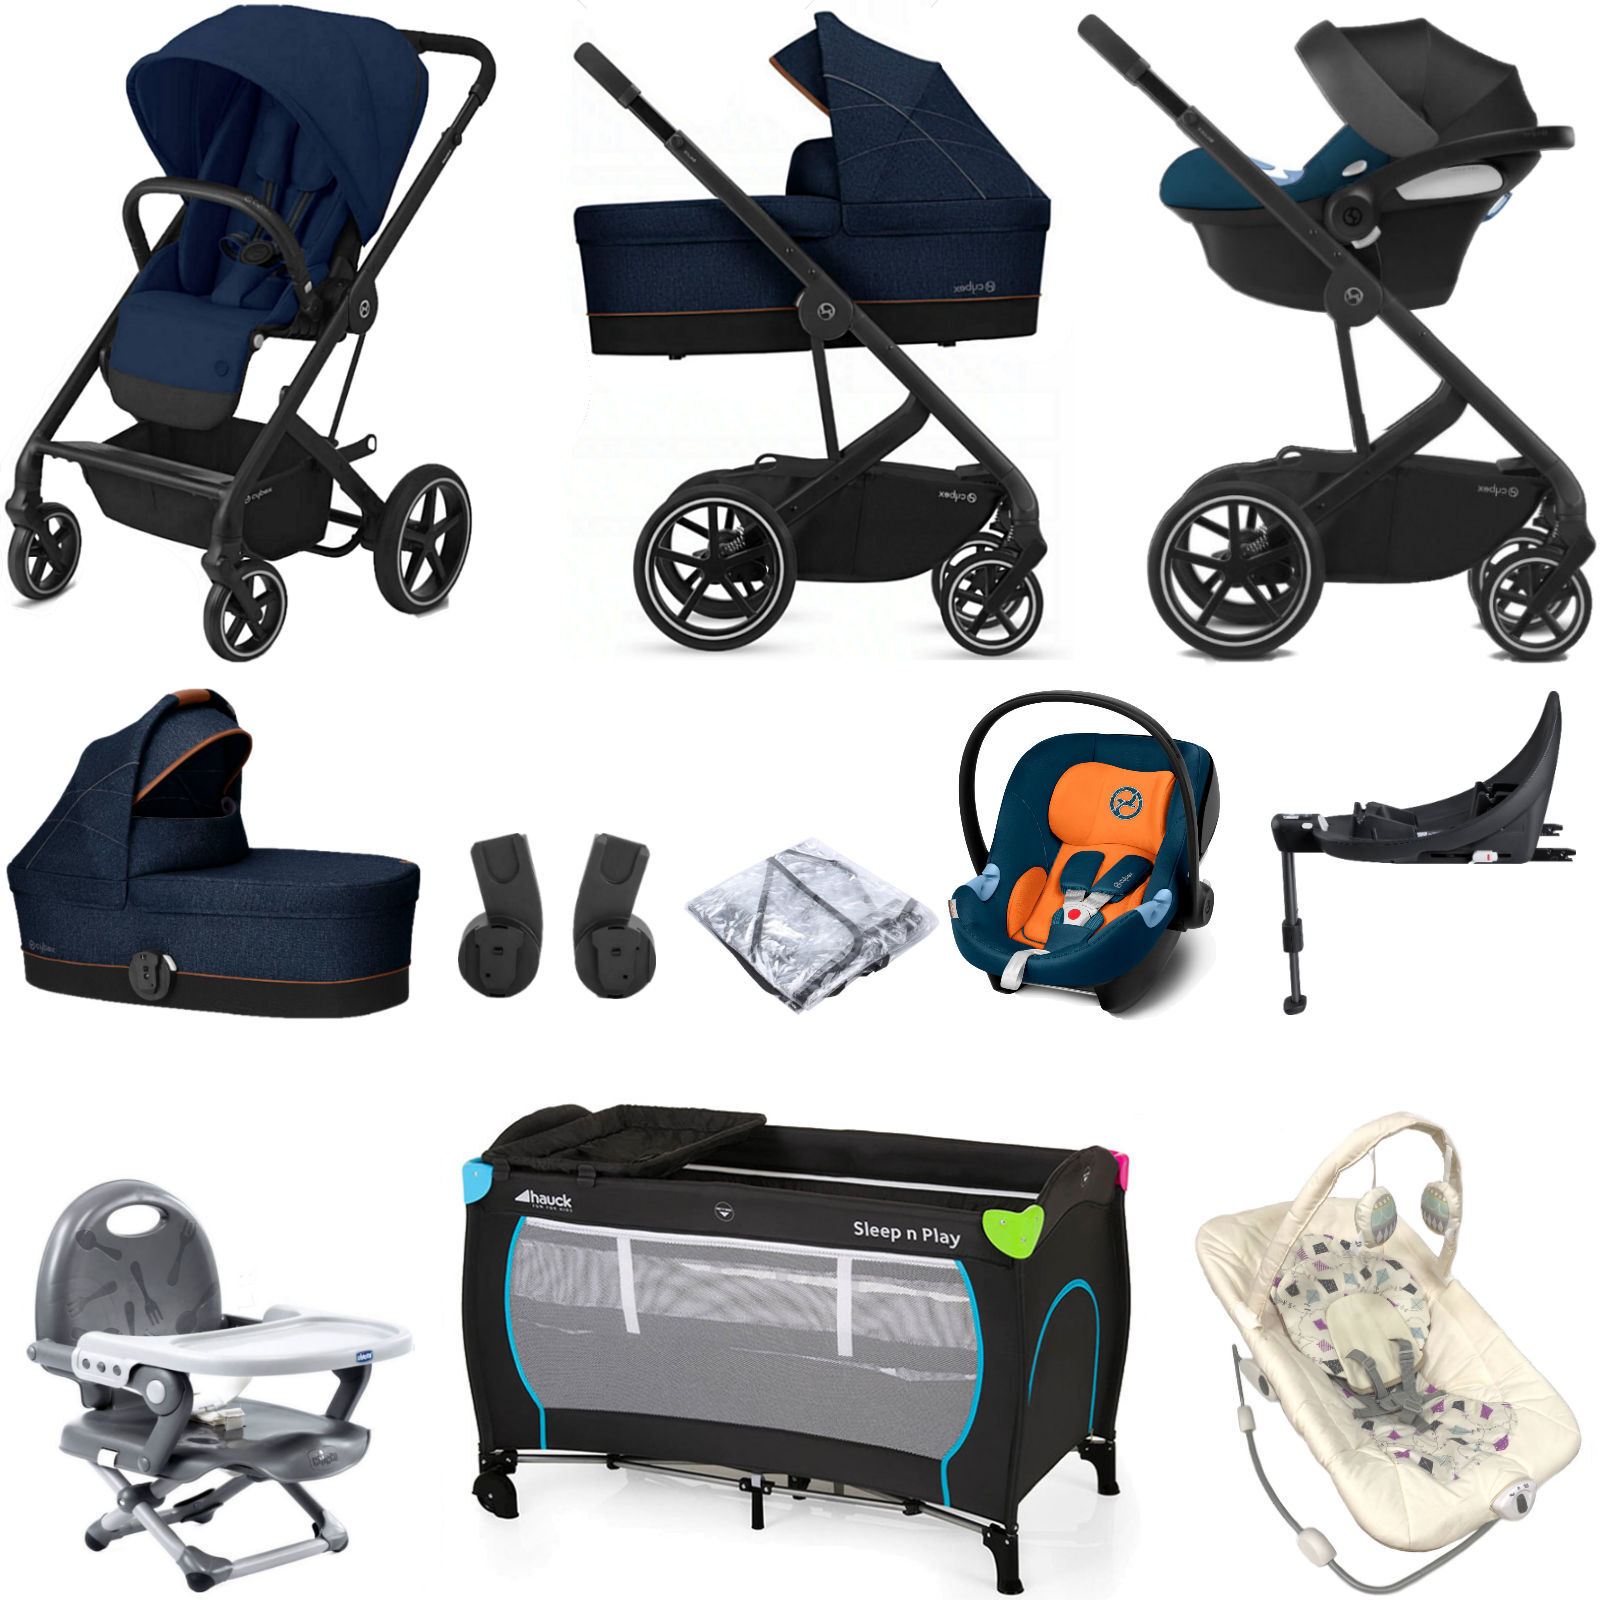 Cybex Balios S Lux (Aton M) Everything You Need Travel System with Carrycot & ISOFIX Base - Navy Blue